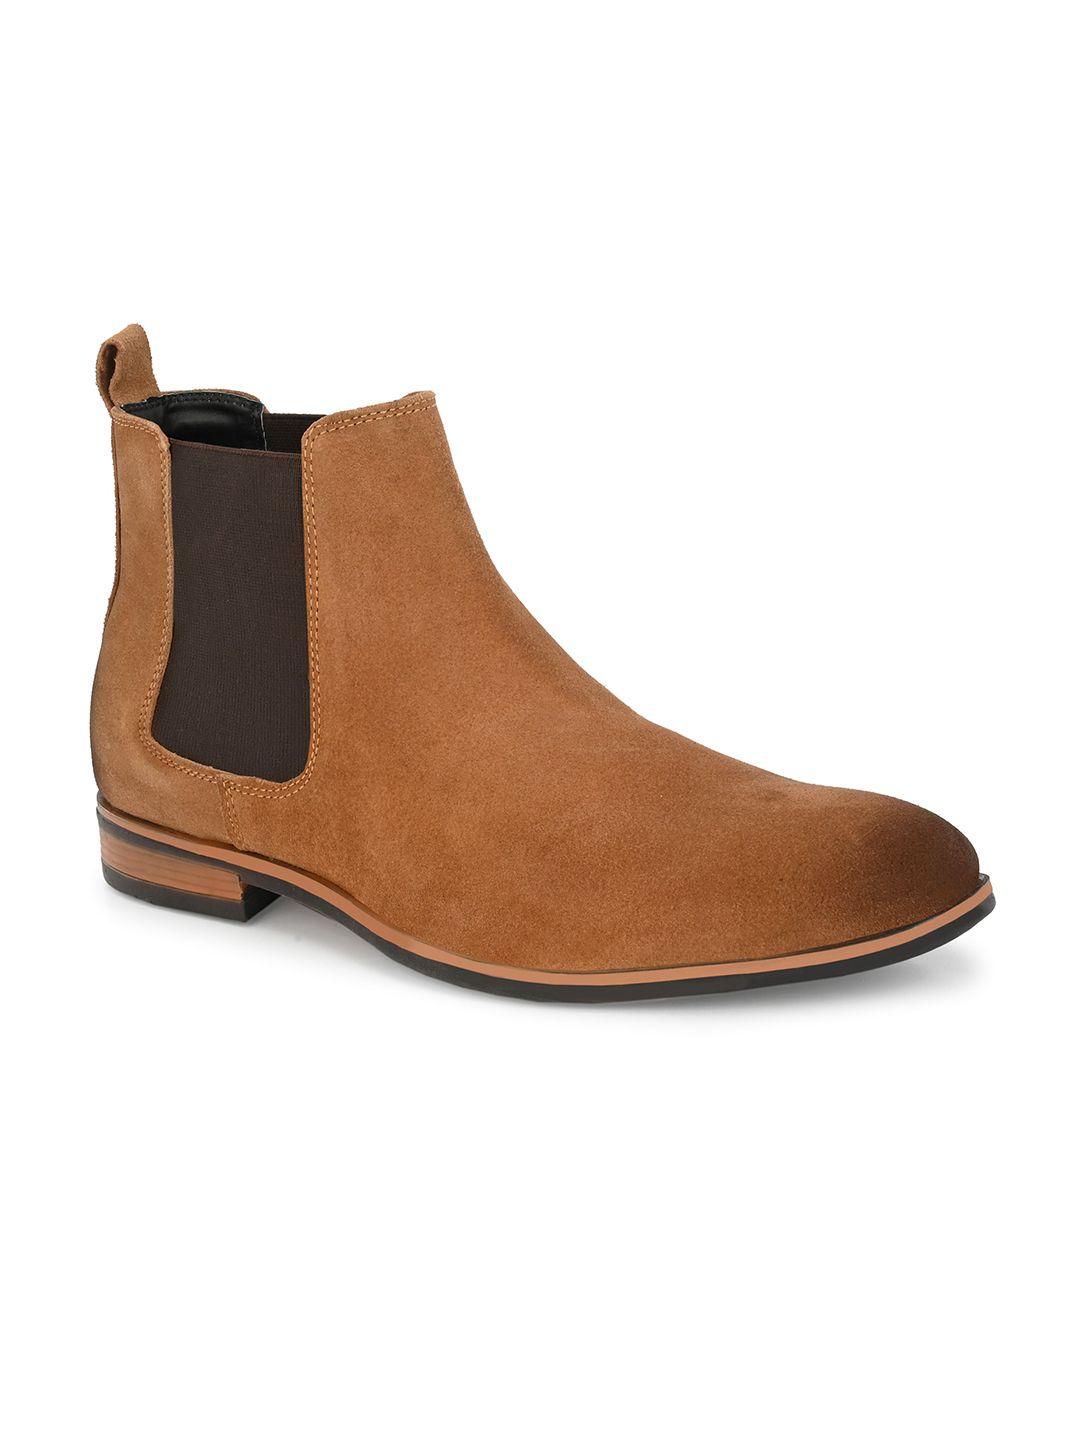 shences men mid-top casual suede chelsea boots